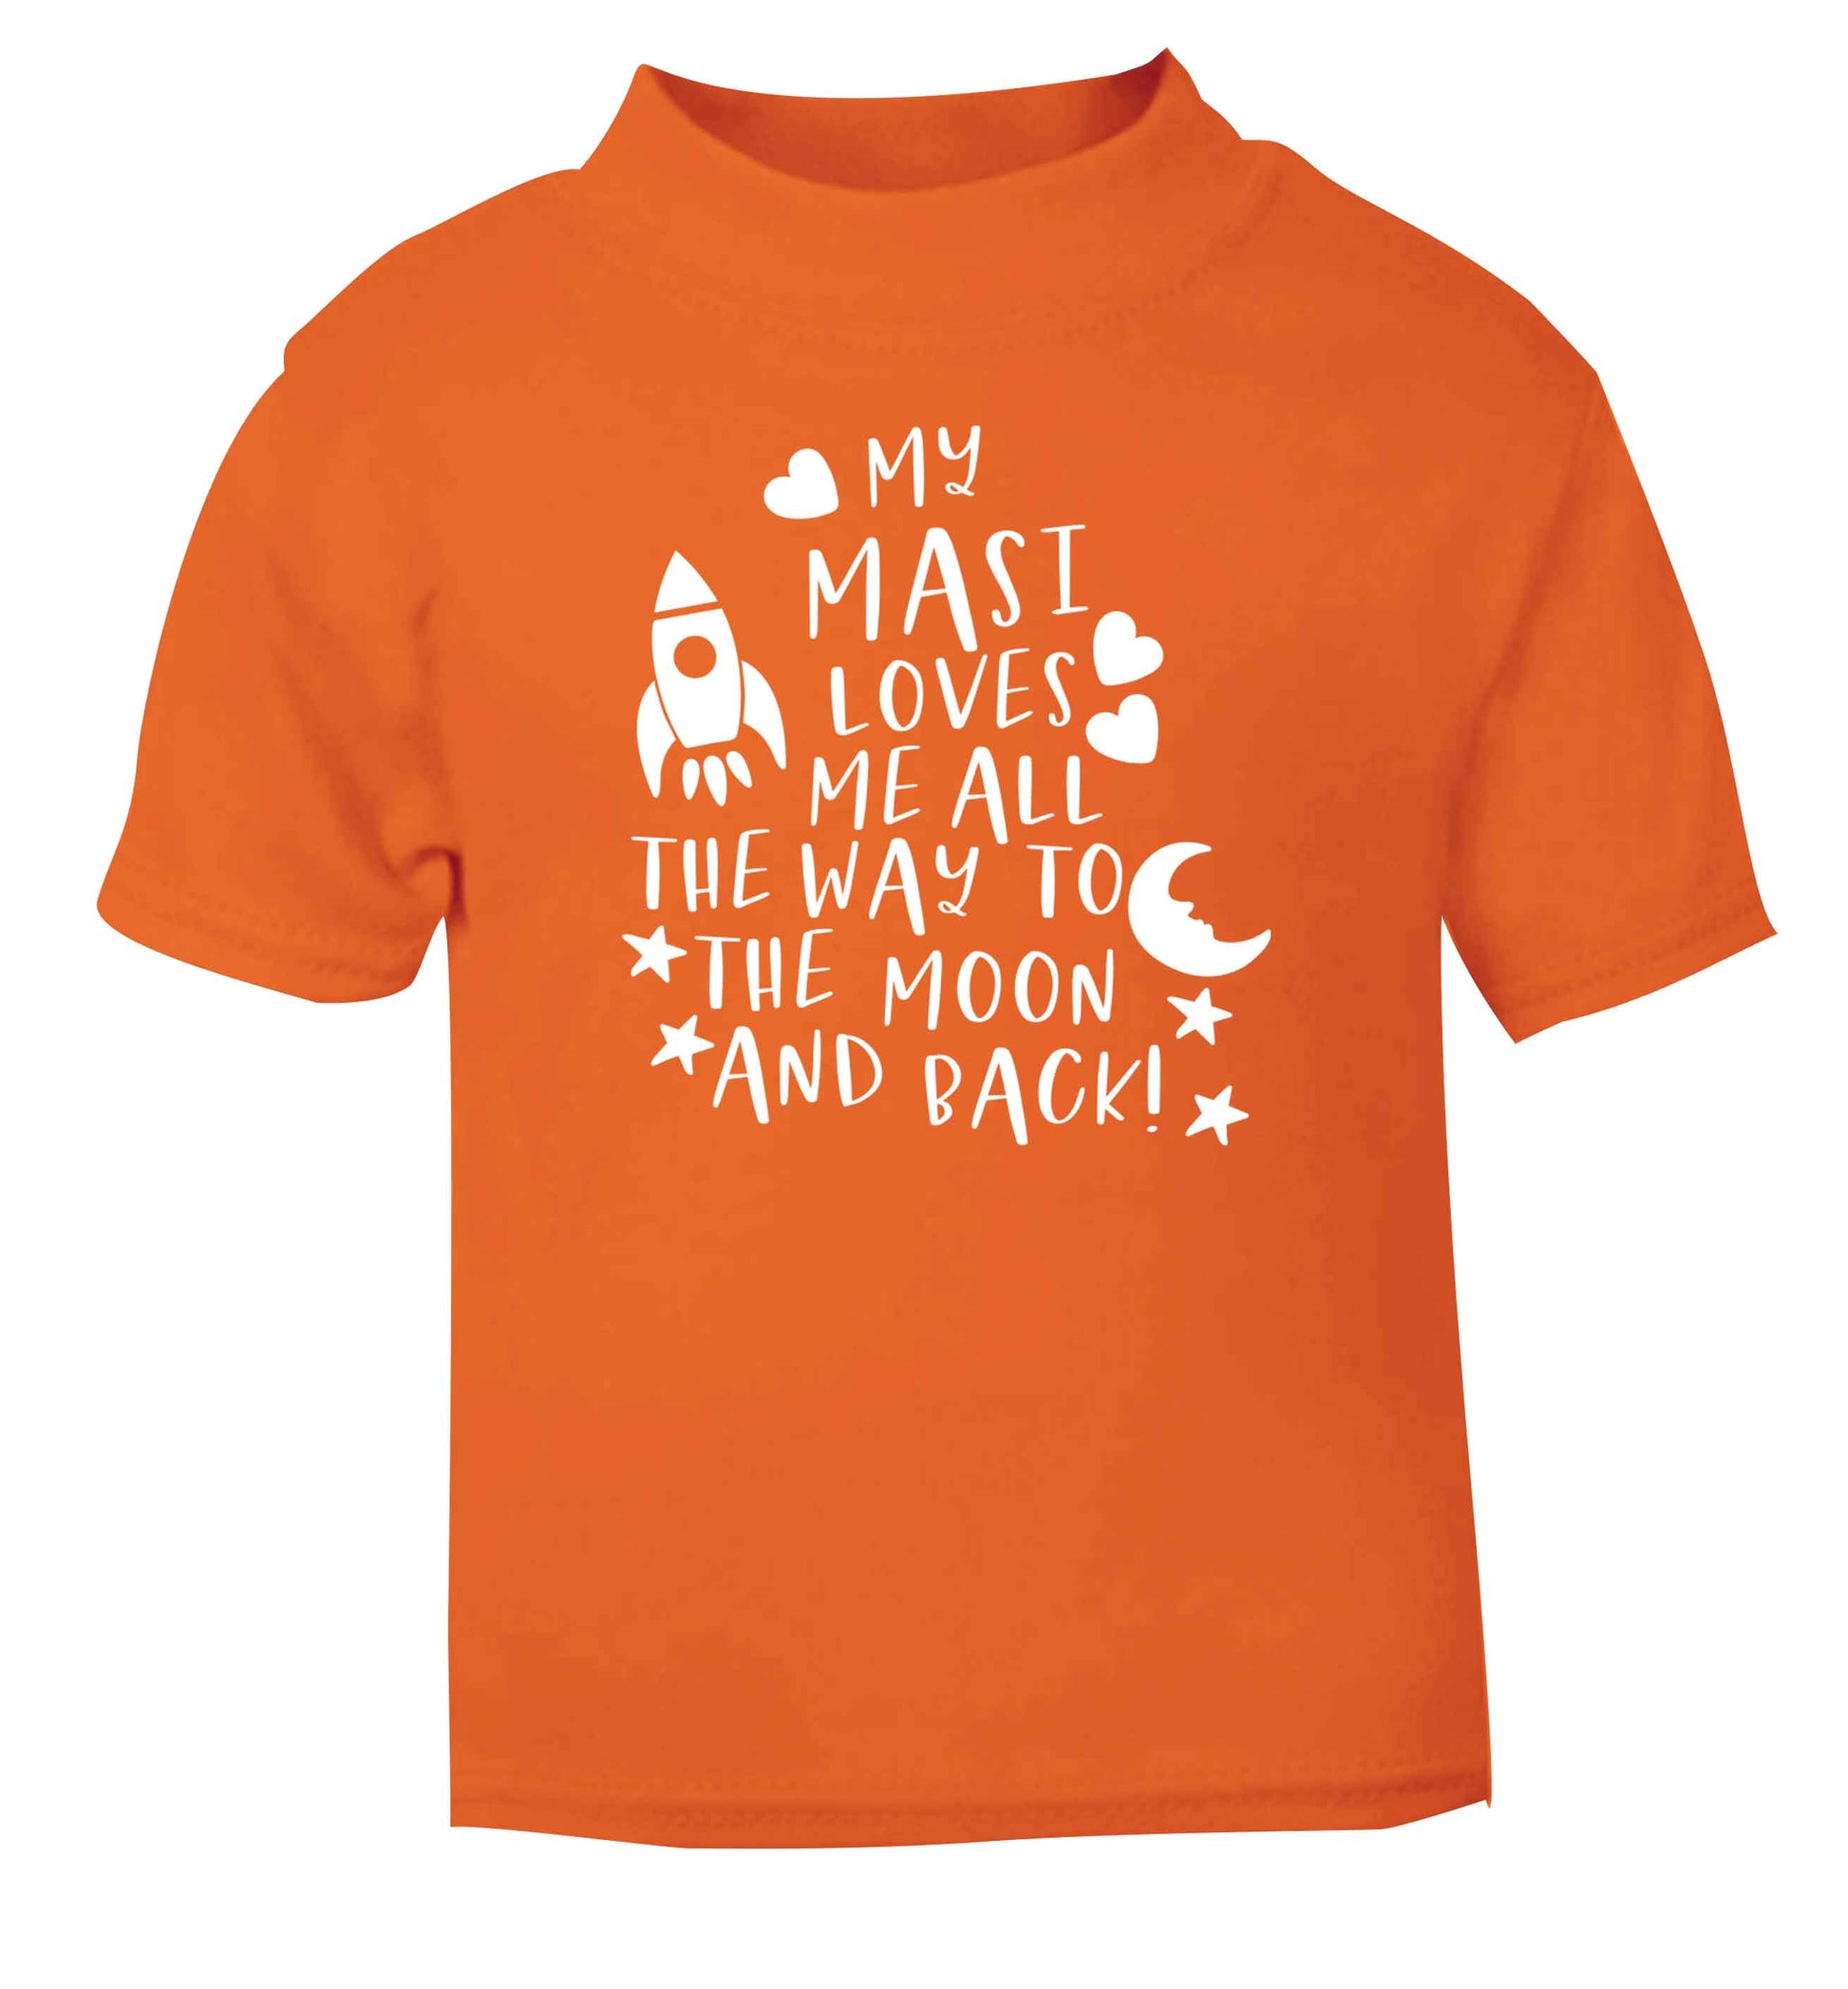 My masi loves me all the way to the moon and back orange Baby Toddler Tshirt 2 Years